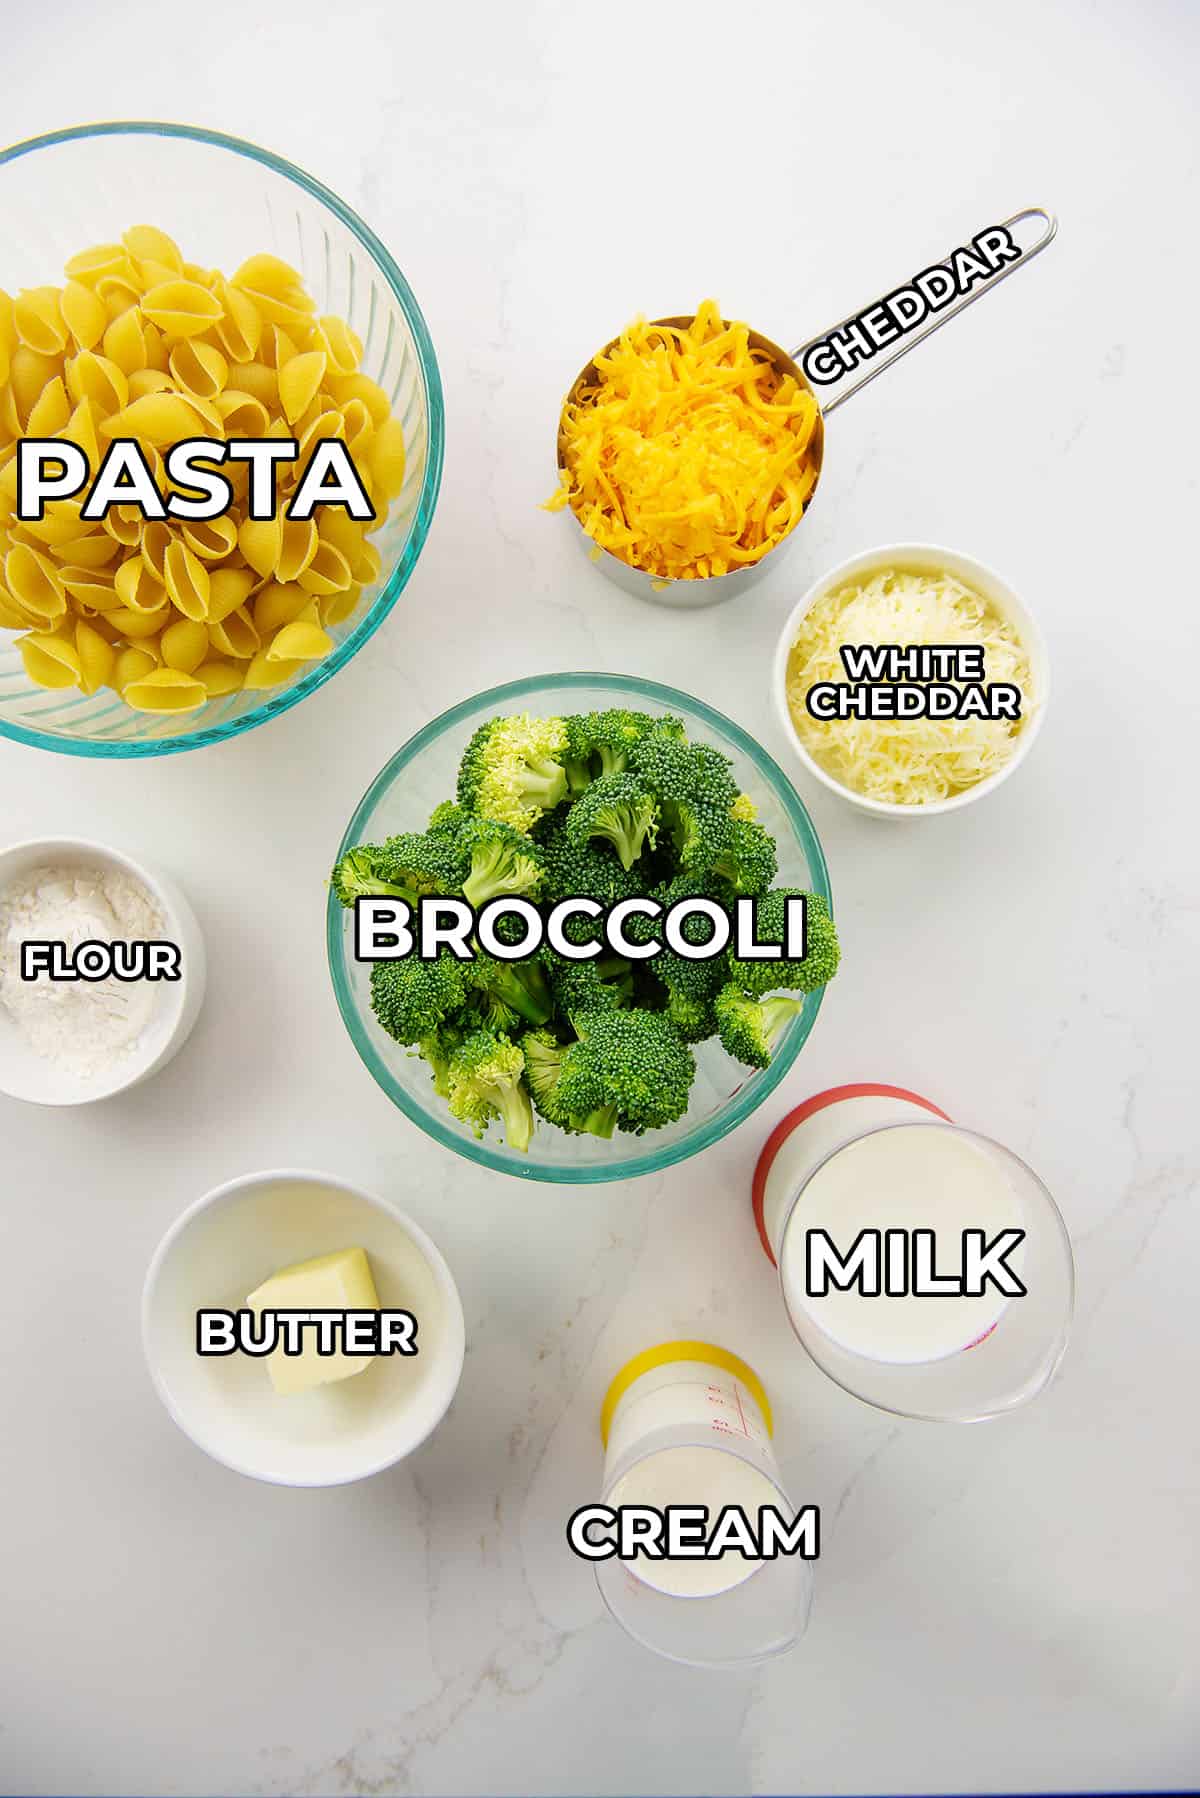 ingredients for broccoli macaroni and cheese recipe.